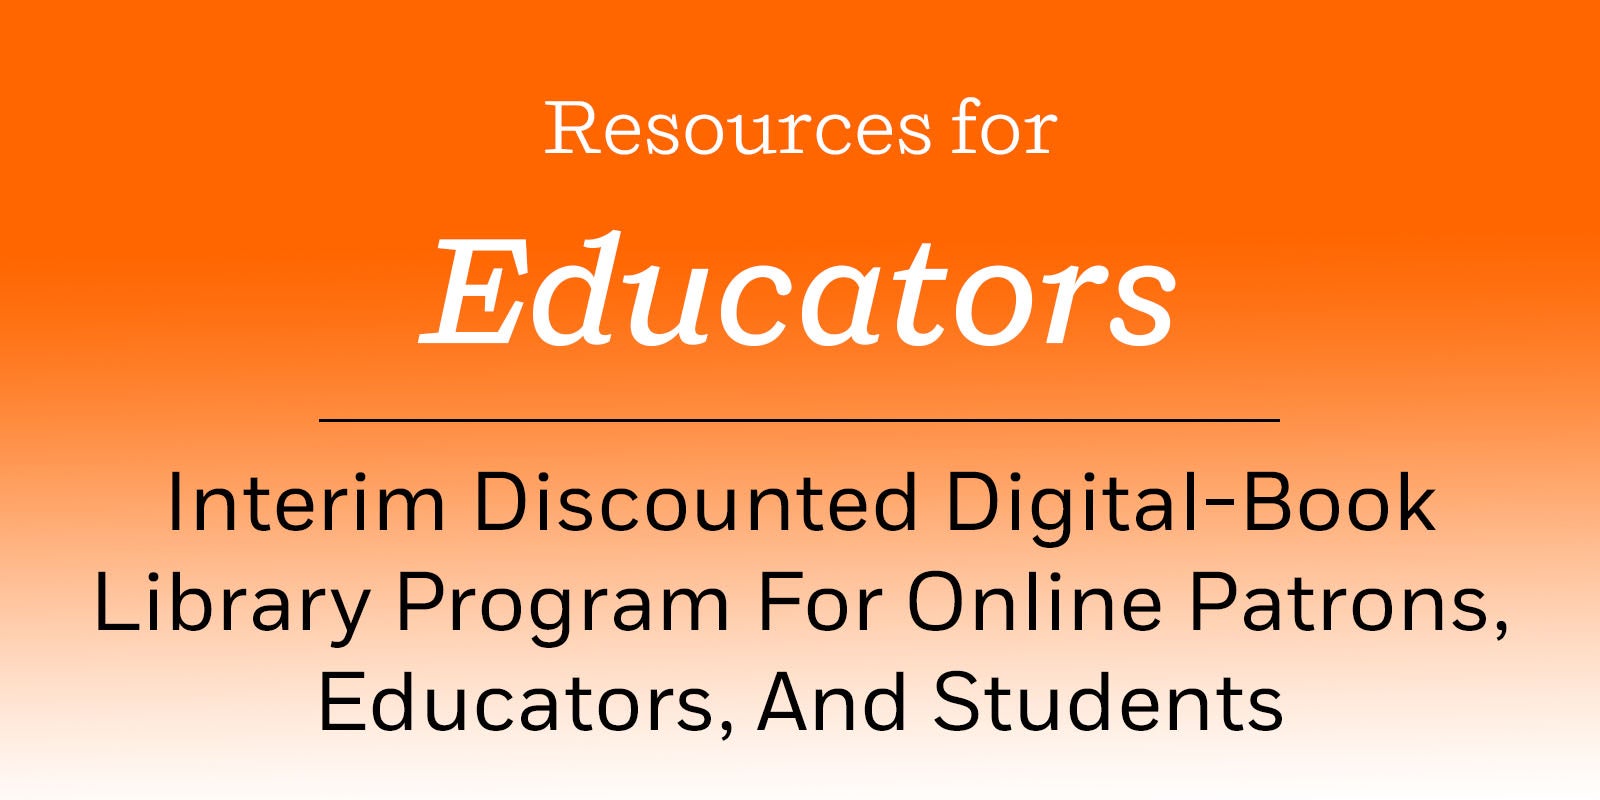 Penguin Random House Sets Interim Discounted Digital-Book Library Program For Online Patrons, Educators, And Students